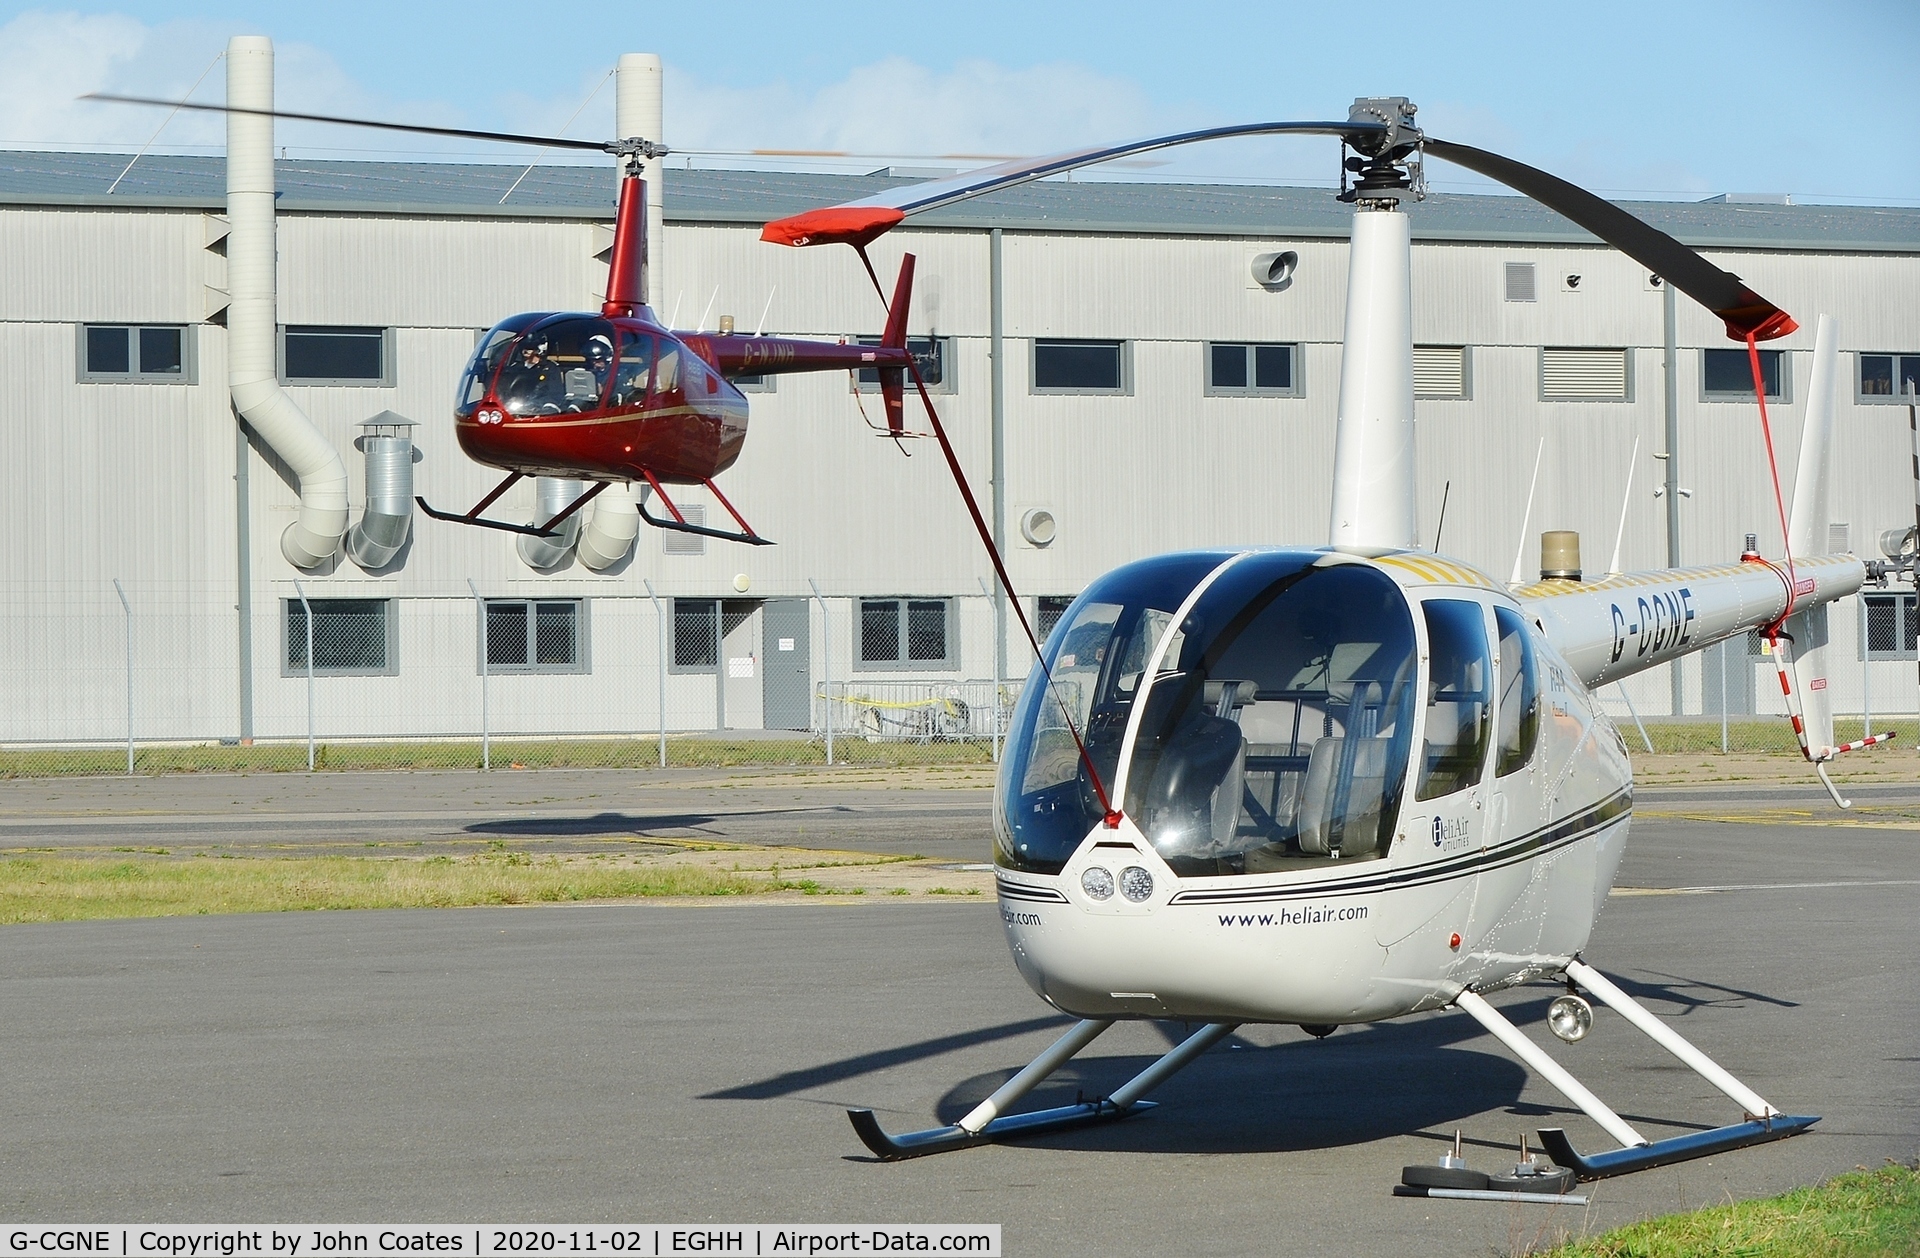 G-CGNE, 2010 Robinson R44 Raven II C/N 12952, At Bliss Avn. with G-NJNH